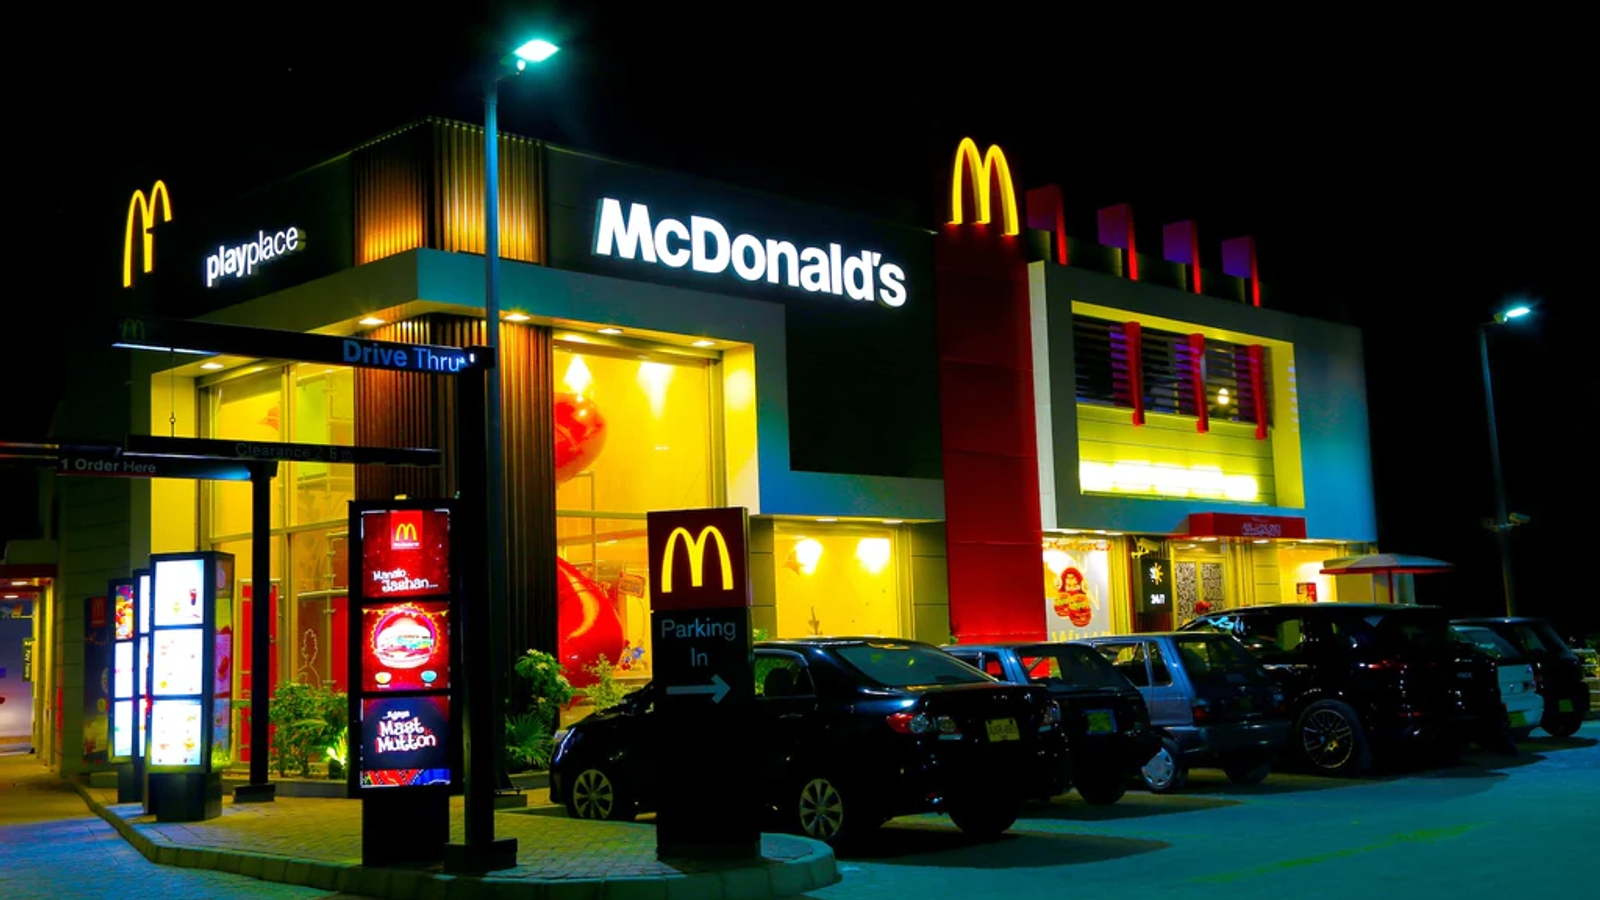 A photo of a McDonald's store lit up at night taken from the outside